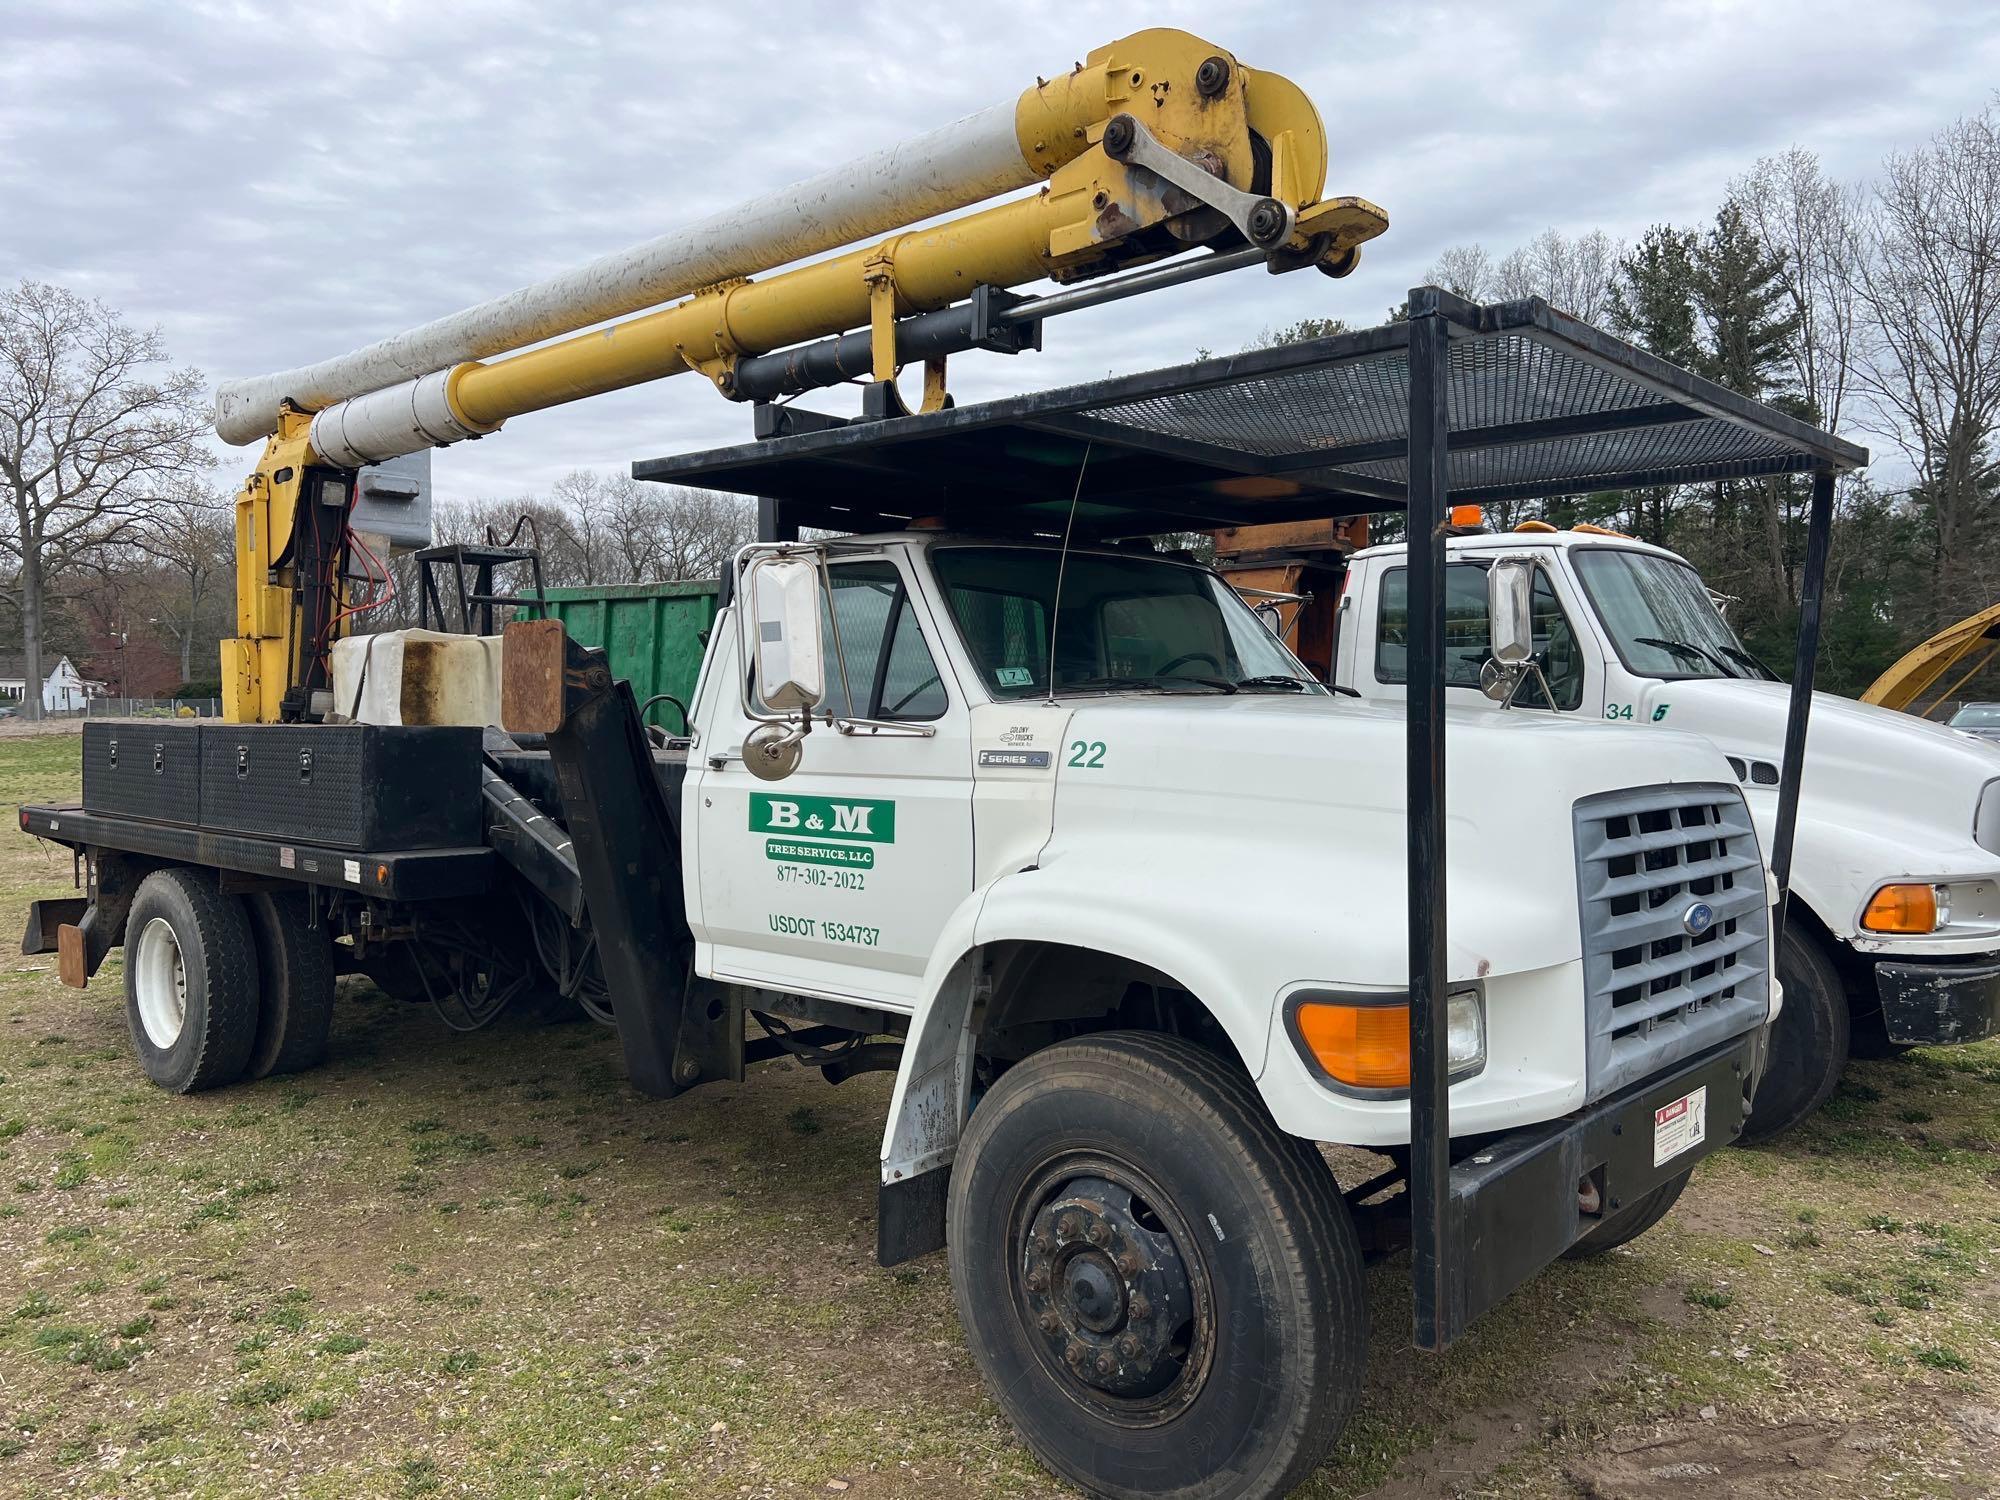 1987 FORD F800 BUCKET TRUCK VN:1FDPT84A6HVA35191 powered by diesel engine, equipped with bucket